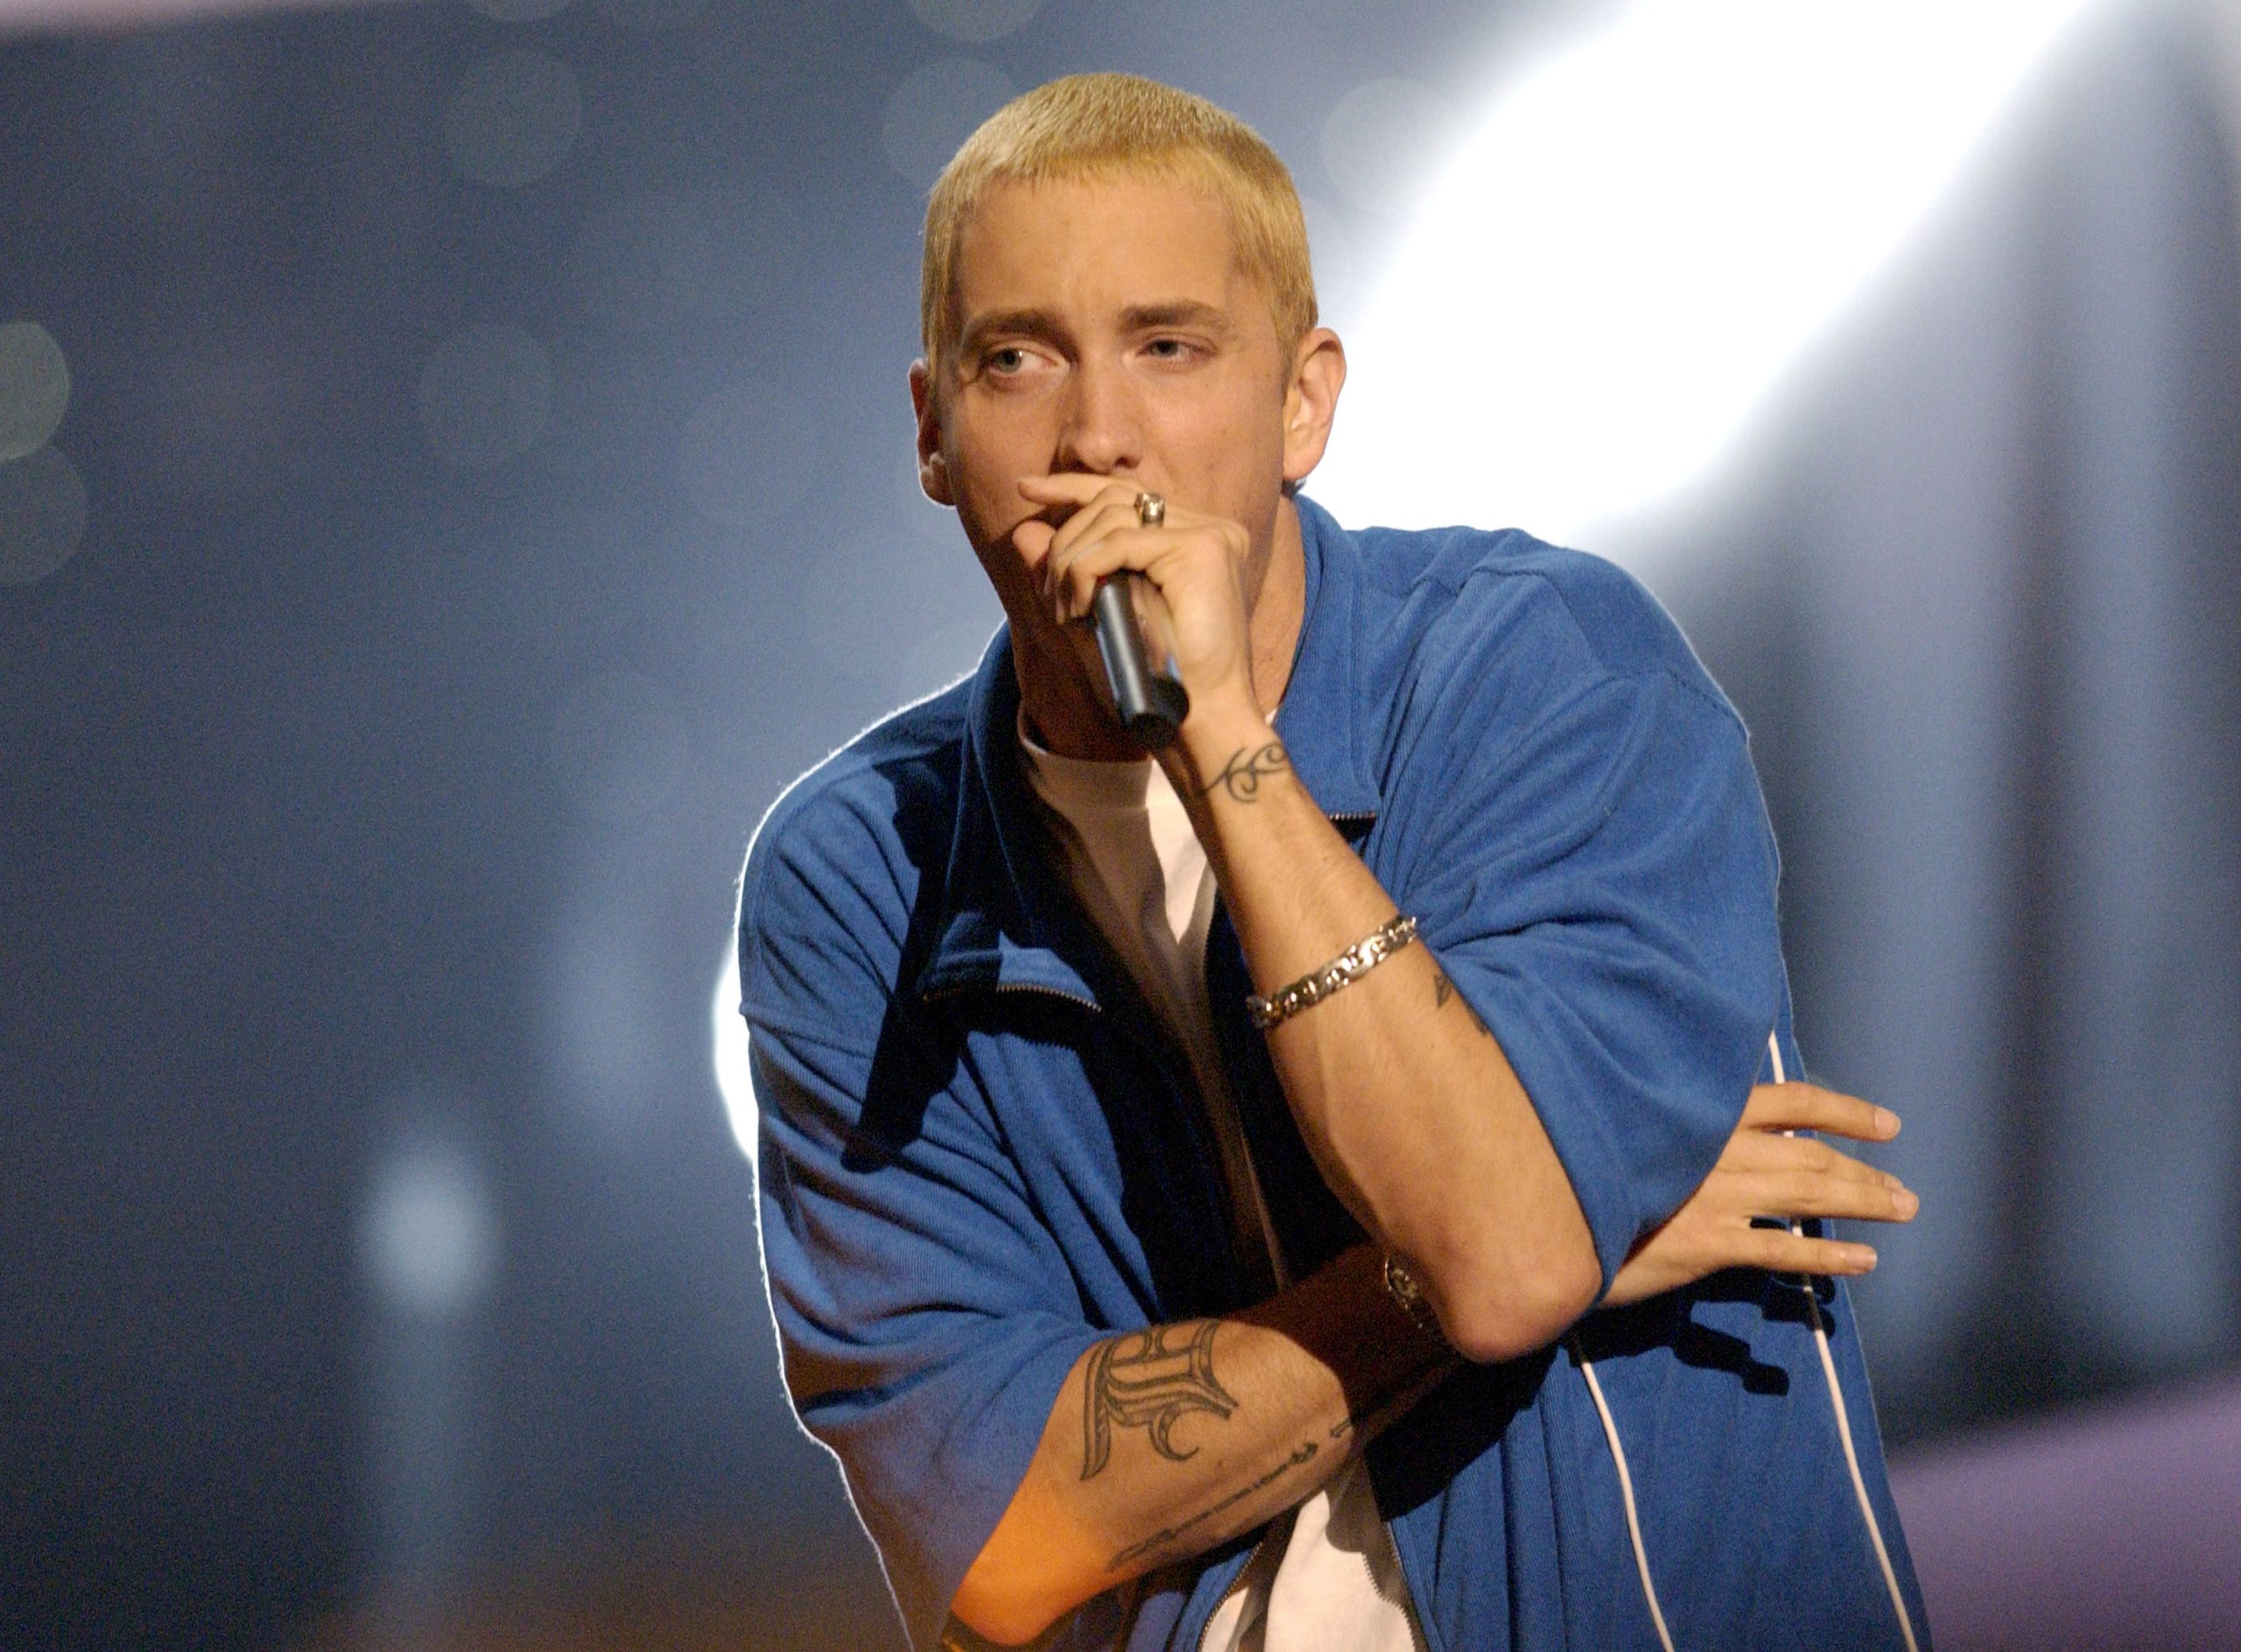 Eminem: The Rap God's Legacy and Impact on the Rap Industry